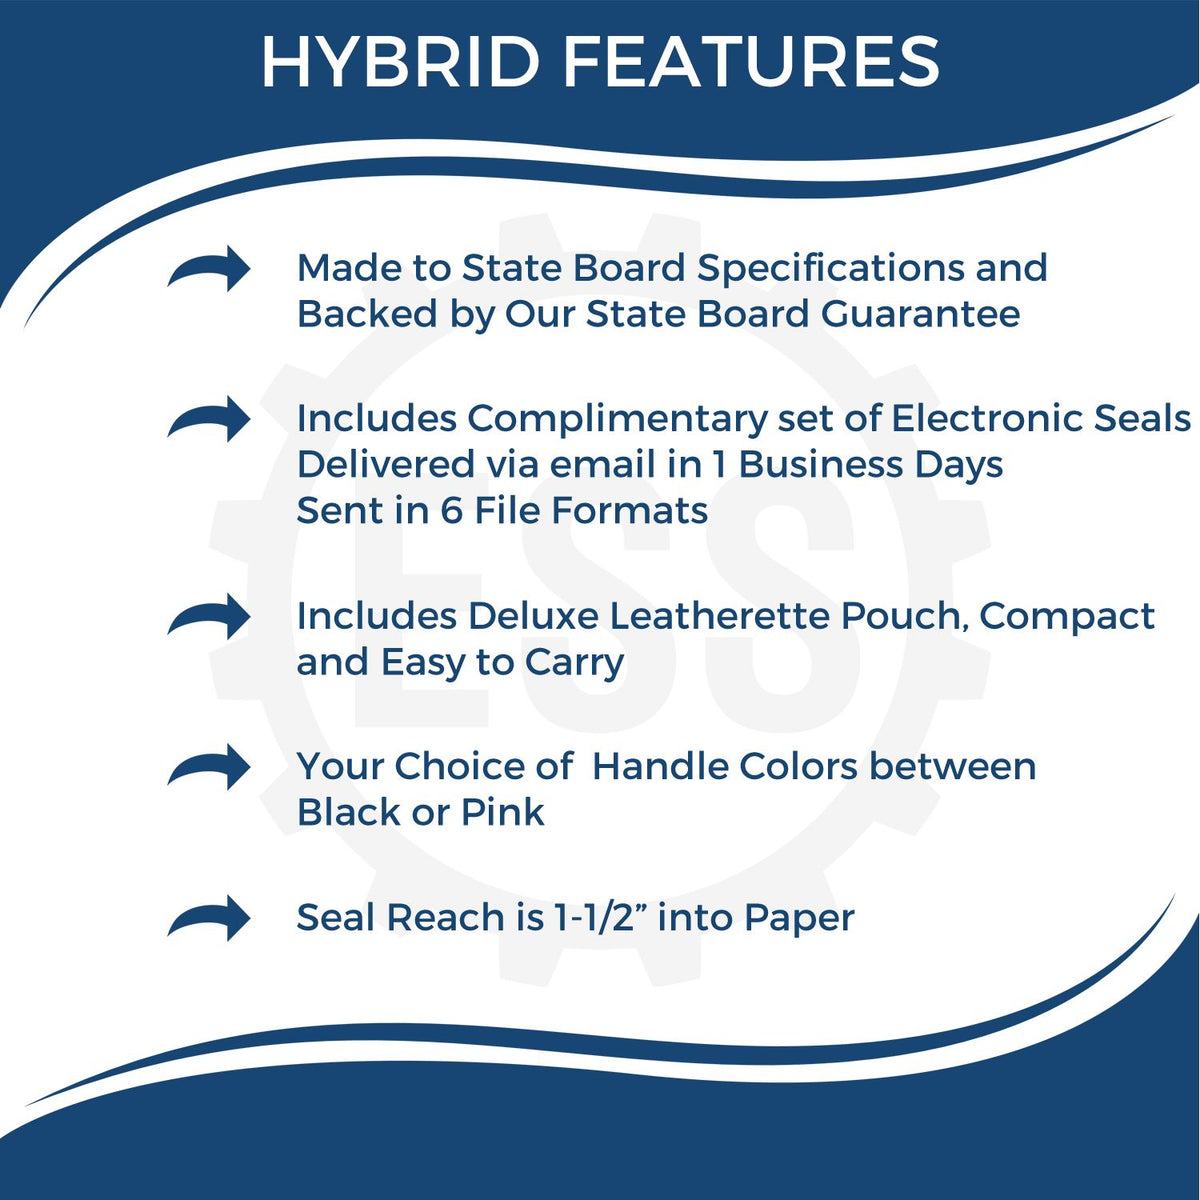 A picture of an infographic highlighting the selling points for the Hybrid Texas Land Surveyor Seal